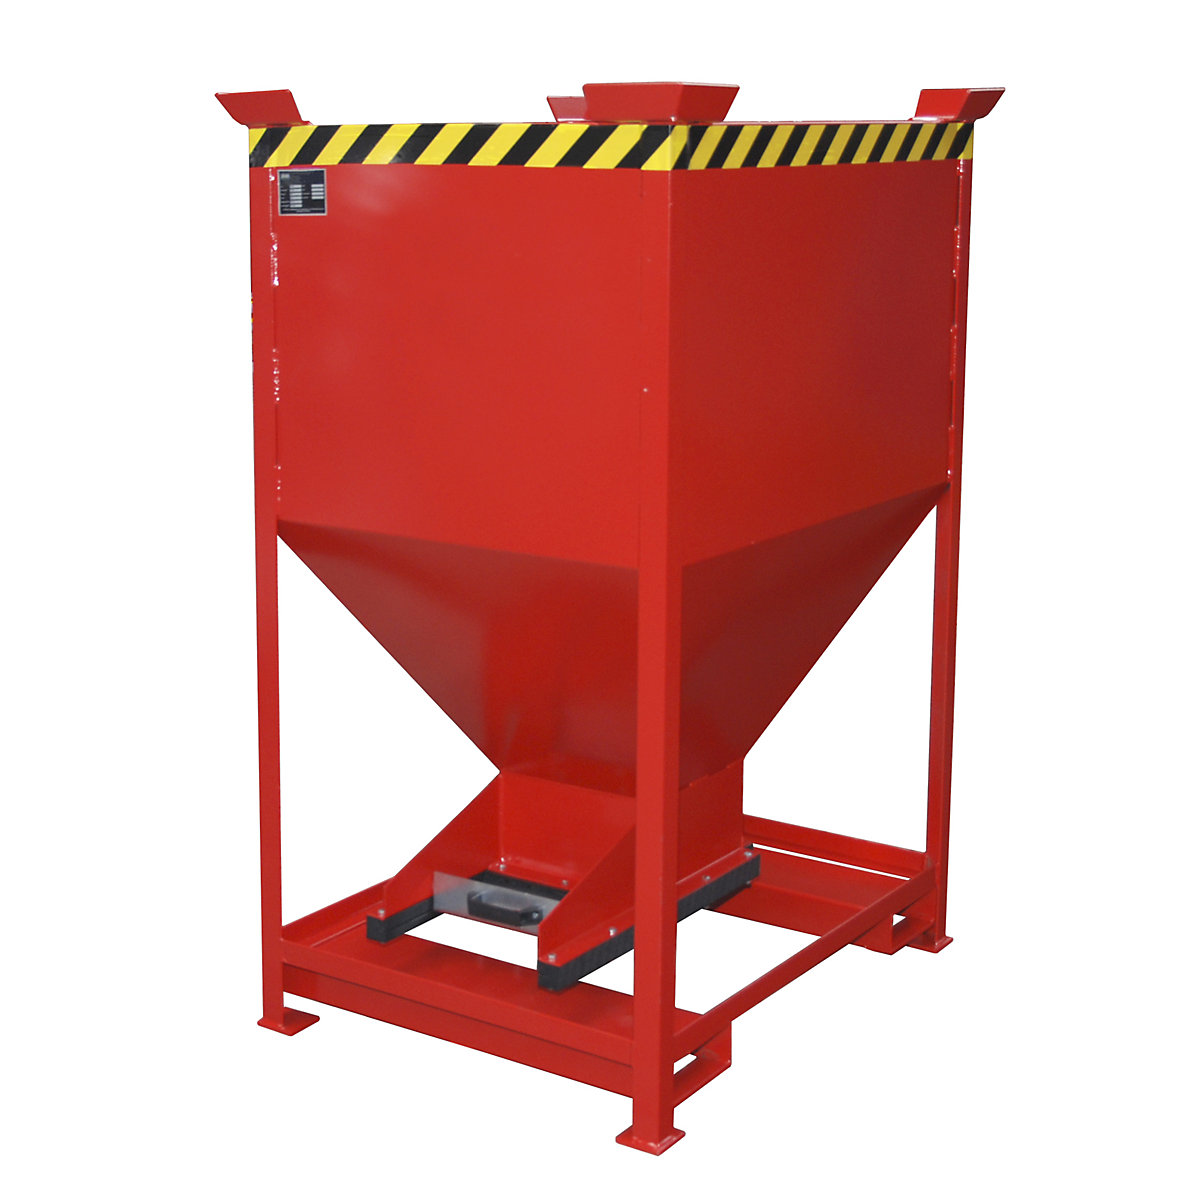 Dispensing hopper, funnel head – eurokraft pro, stationary with forklift pockets, capacity 0.6 m³, flame red-3